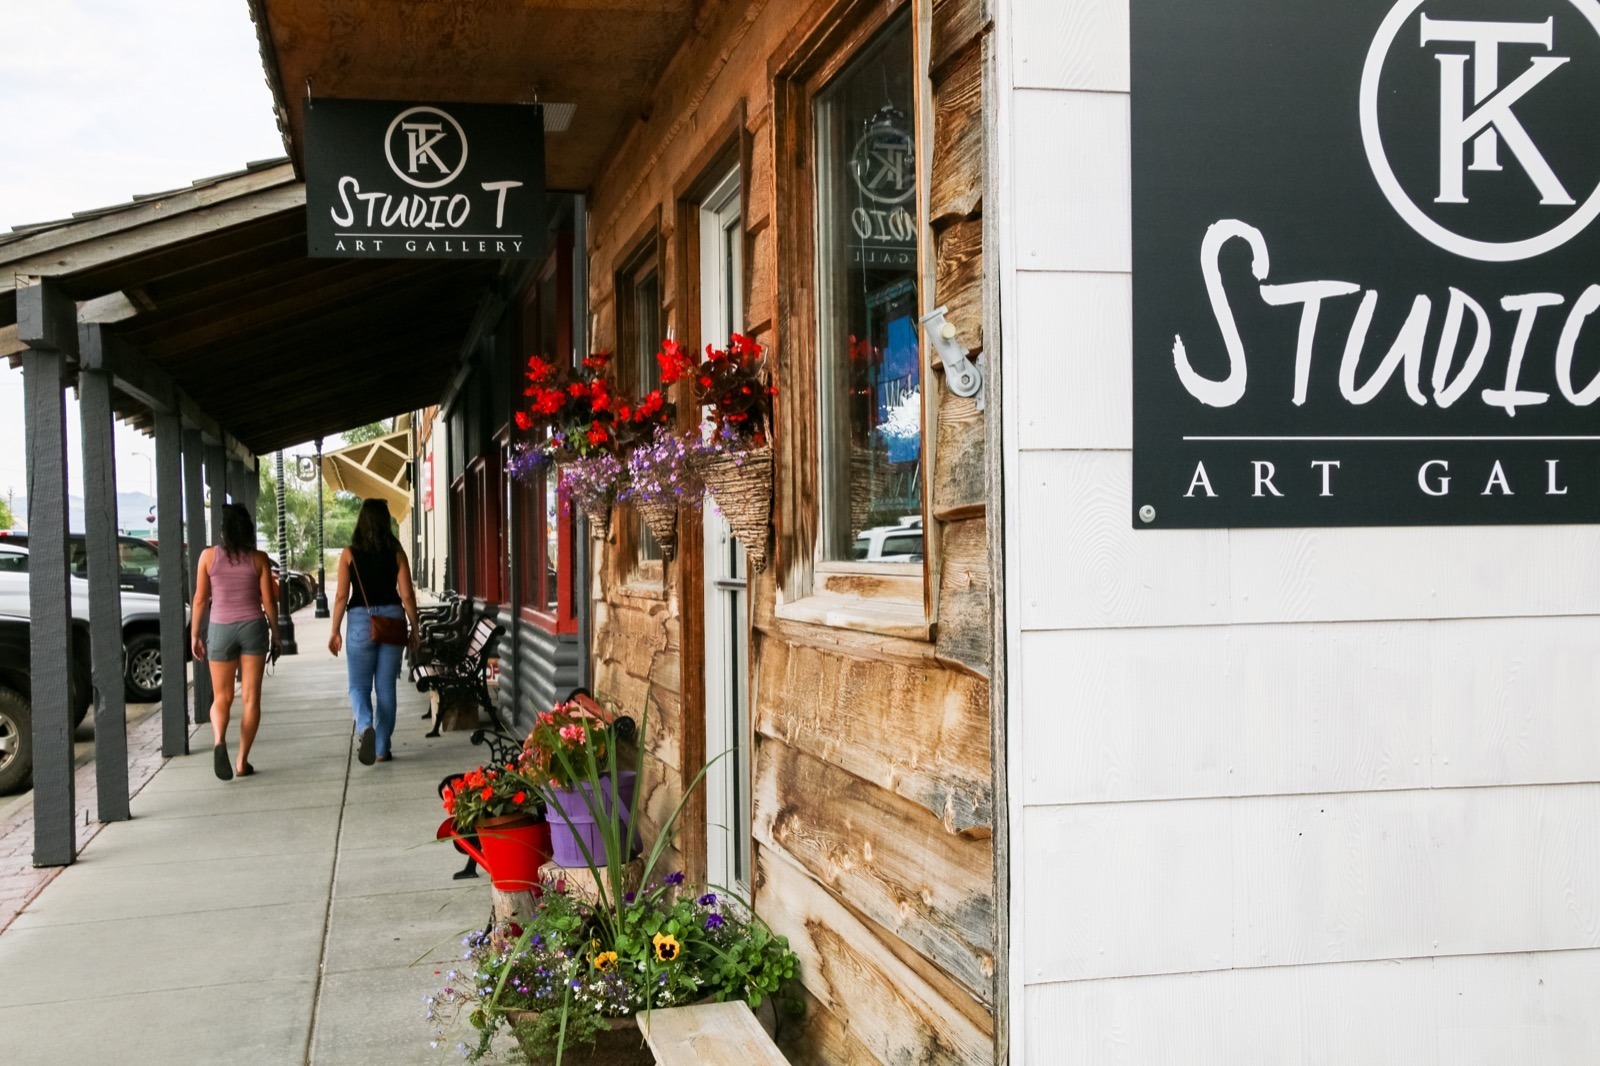 Our escape to Saratoga included adorable downtown shopping